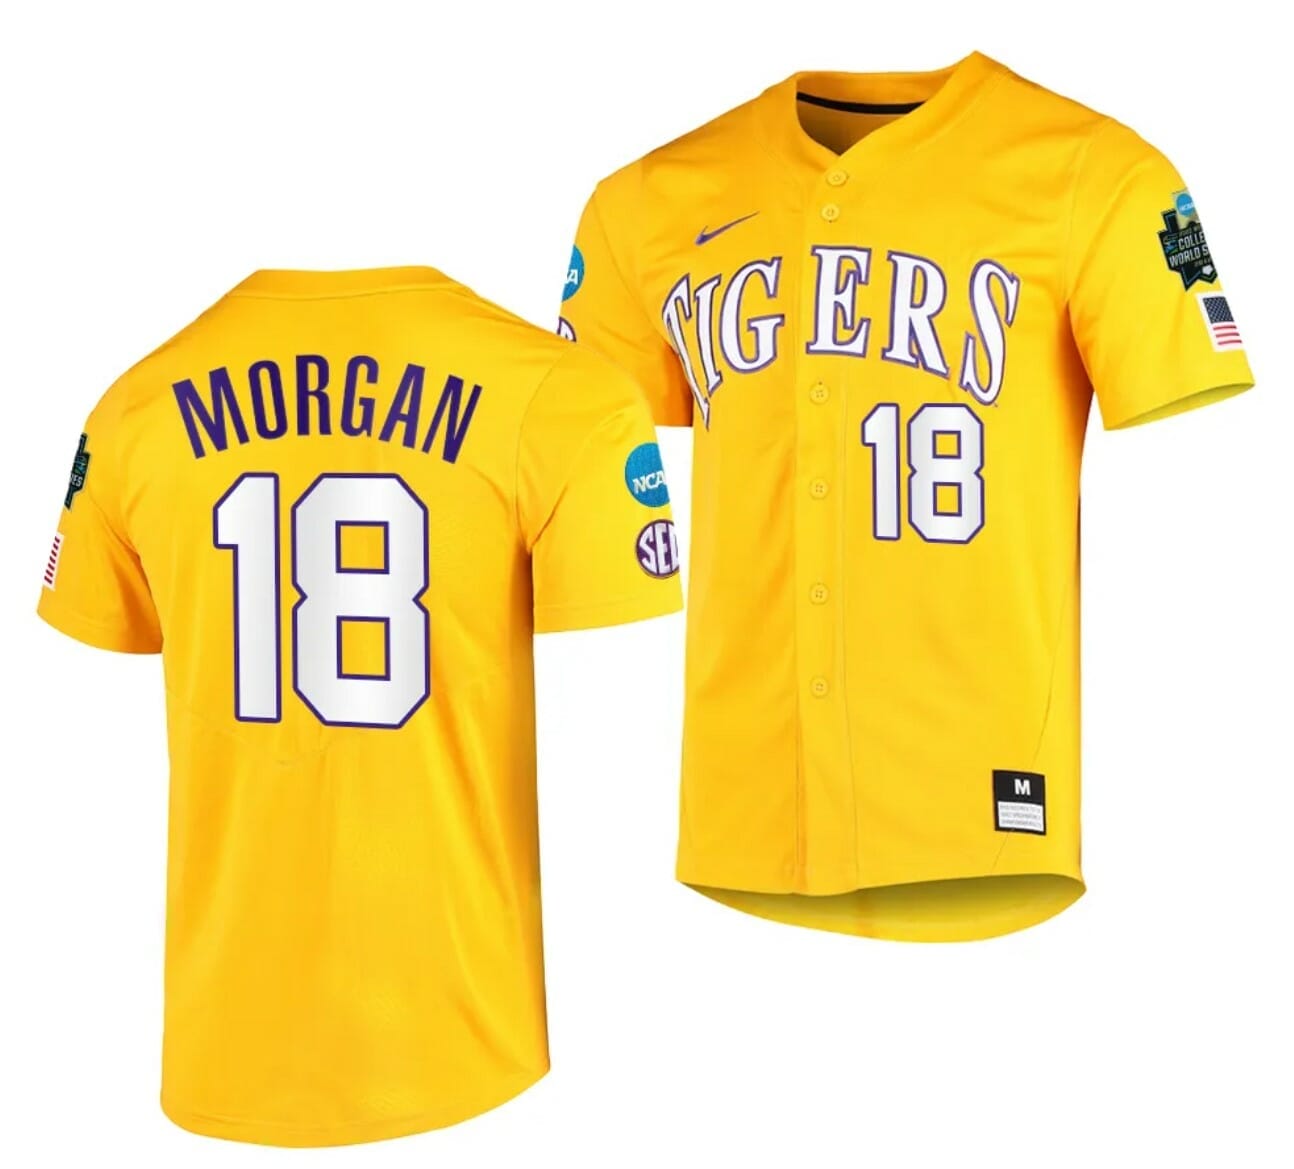 World Series Gold MLB Jerseys for sale